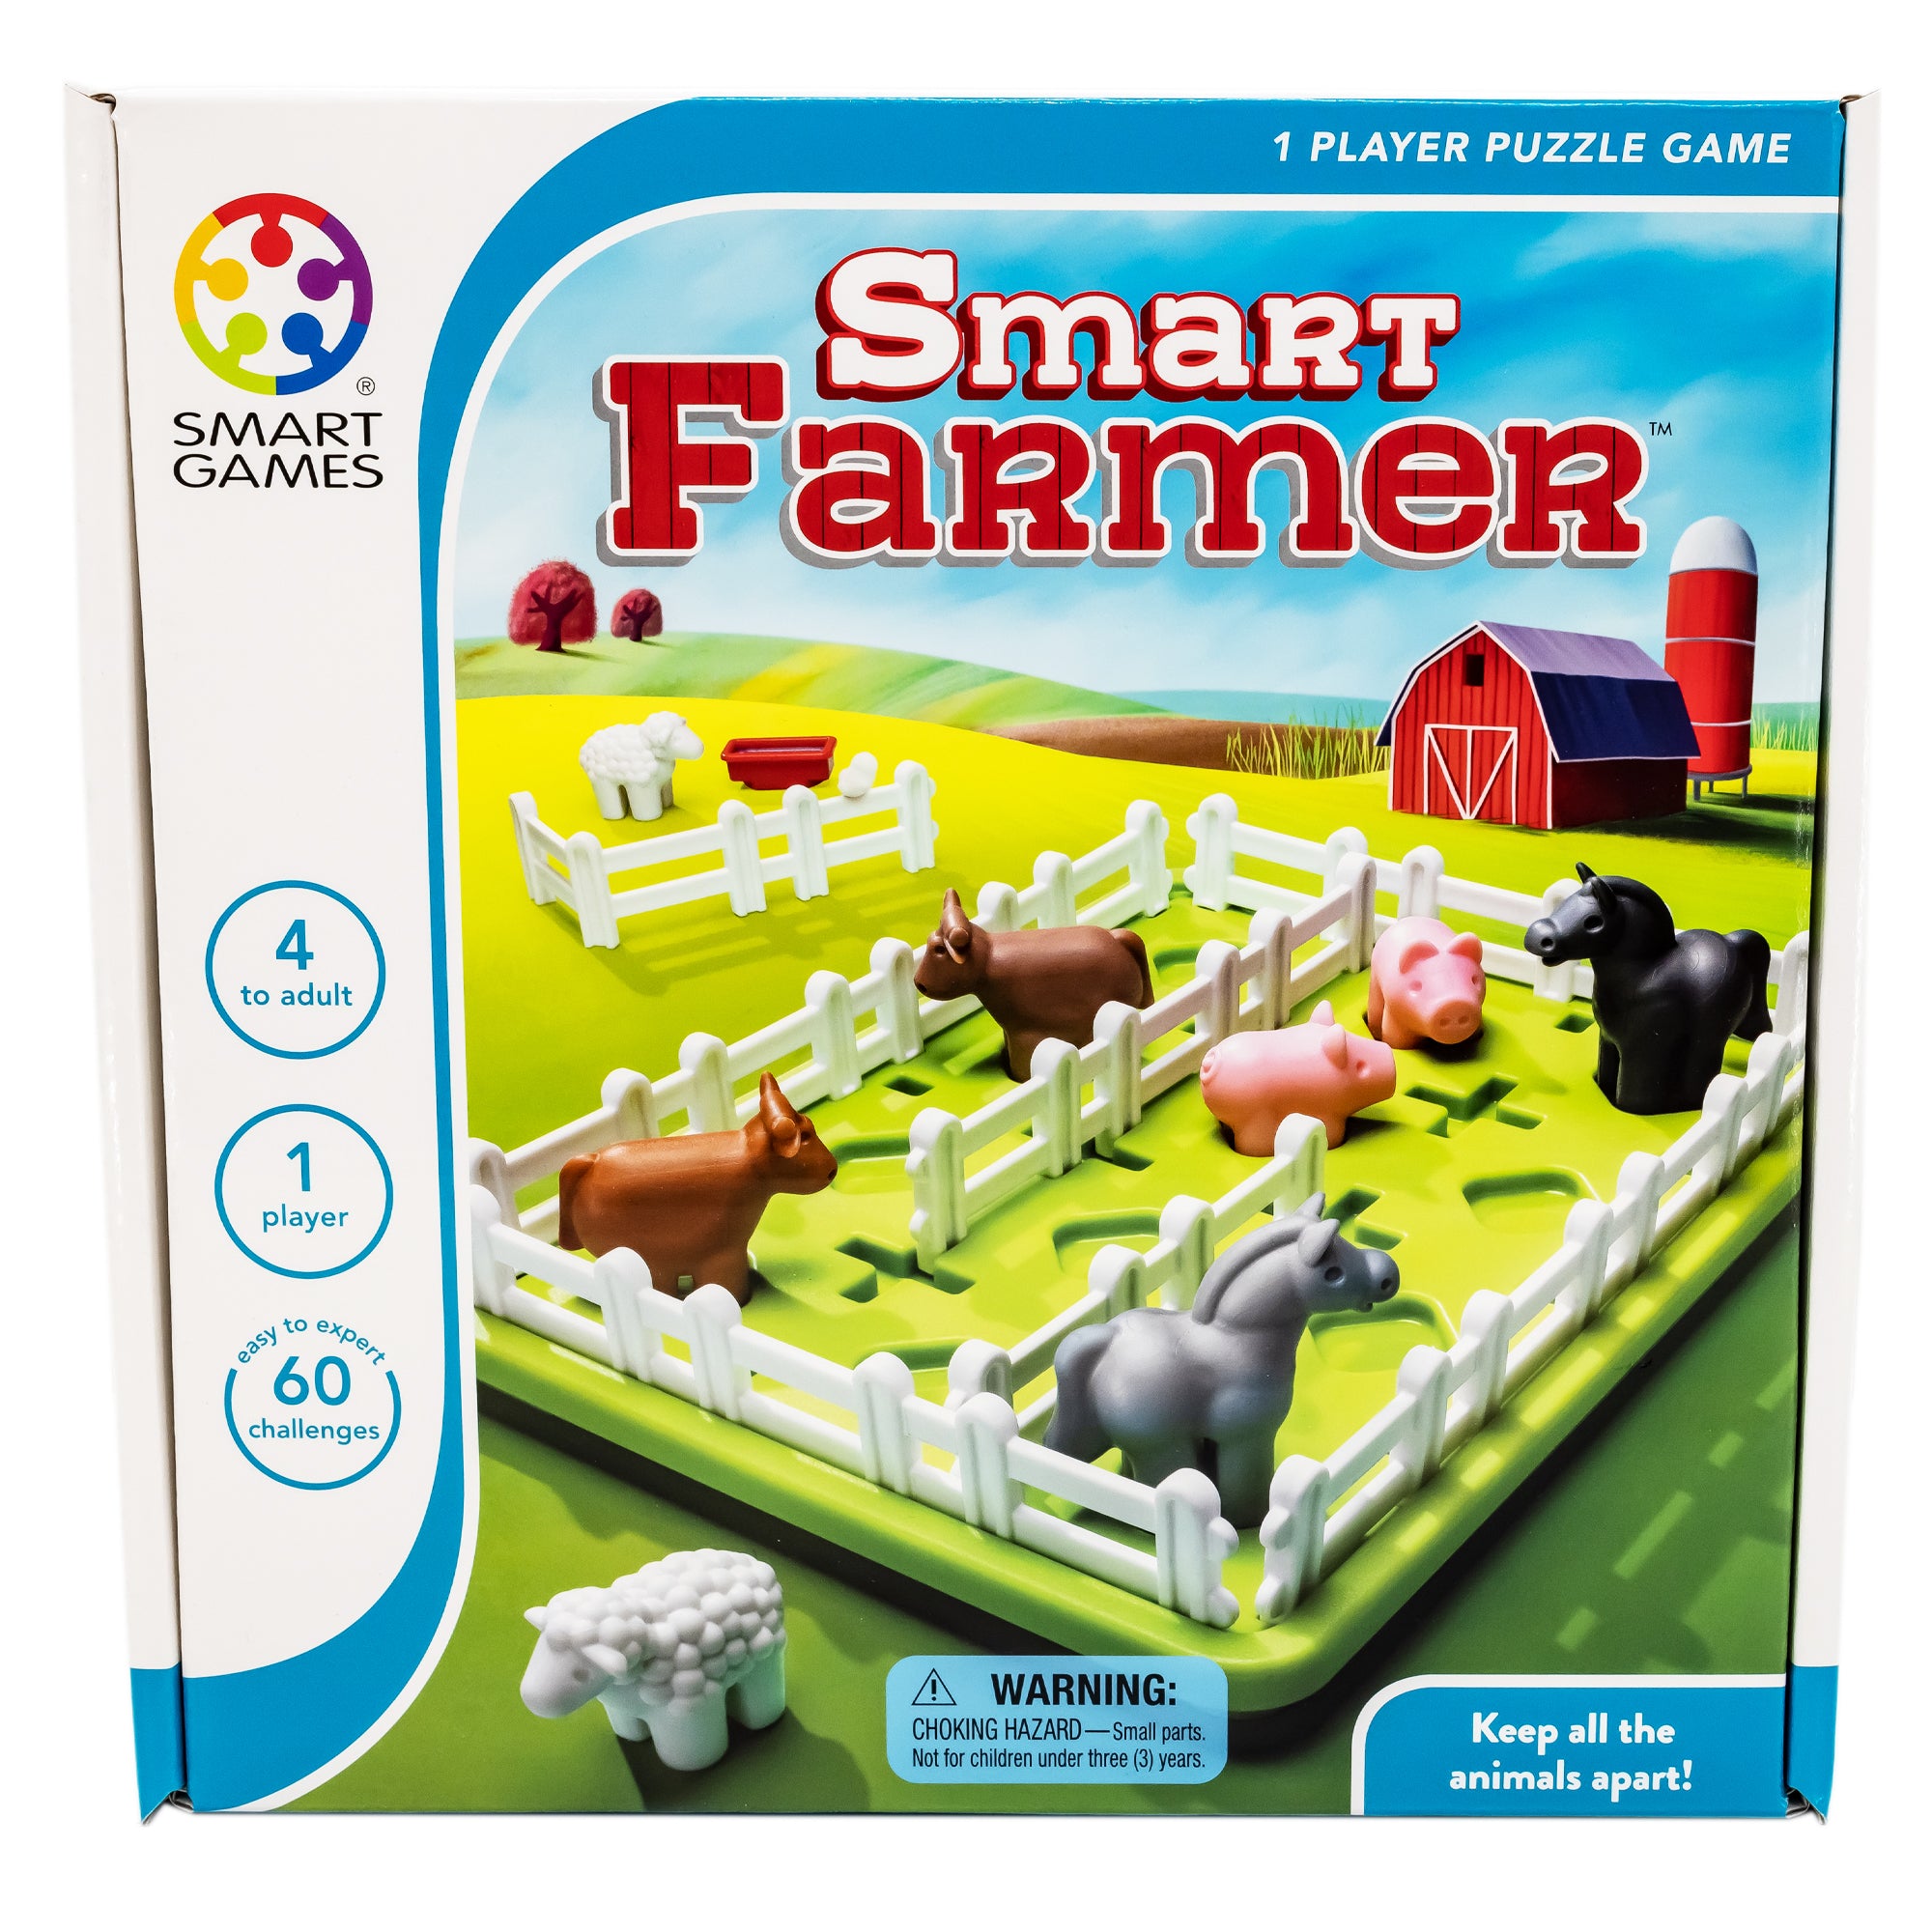 Smart Farmer game box. The cover shows the actual game in play. The green rectangle-shaped game board has white fence pieces all around the edge and a few through the middle. You can see cows, pigs, and horses inside the fence. Off to the side are 2 sheep, more fence pieces and a water dish. In the background are rolling green hills and a red barn. The box indicated that it is a 1 player game, the age recommendation is for 4 and older, and there are 60 challenges.